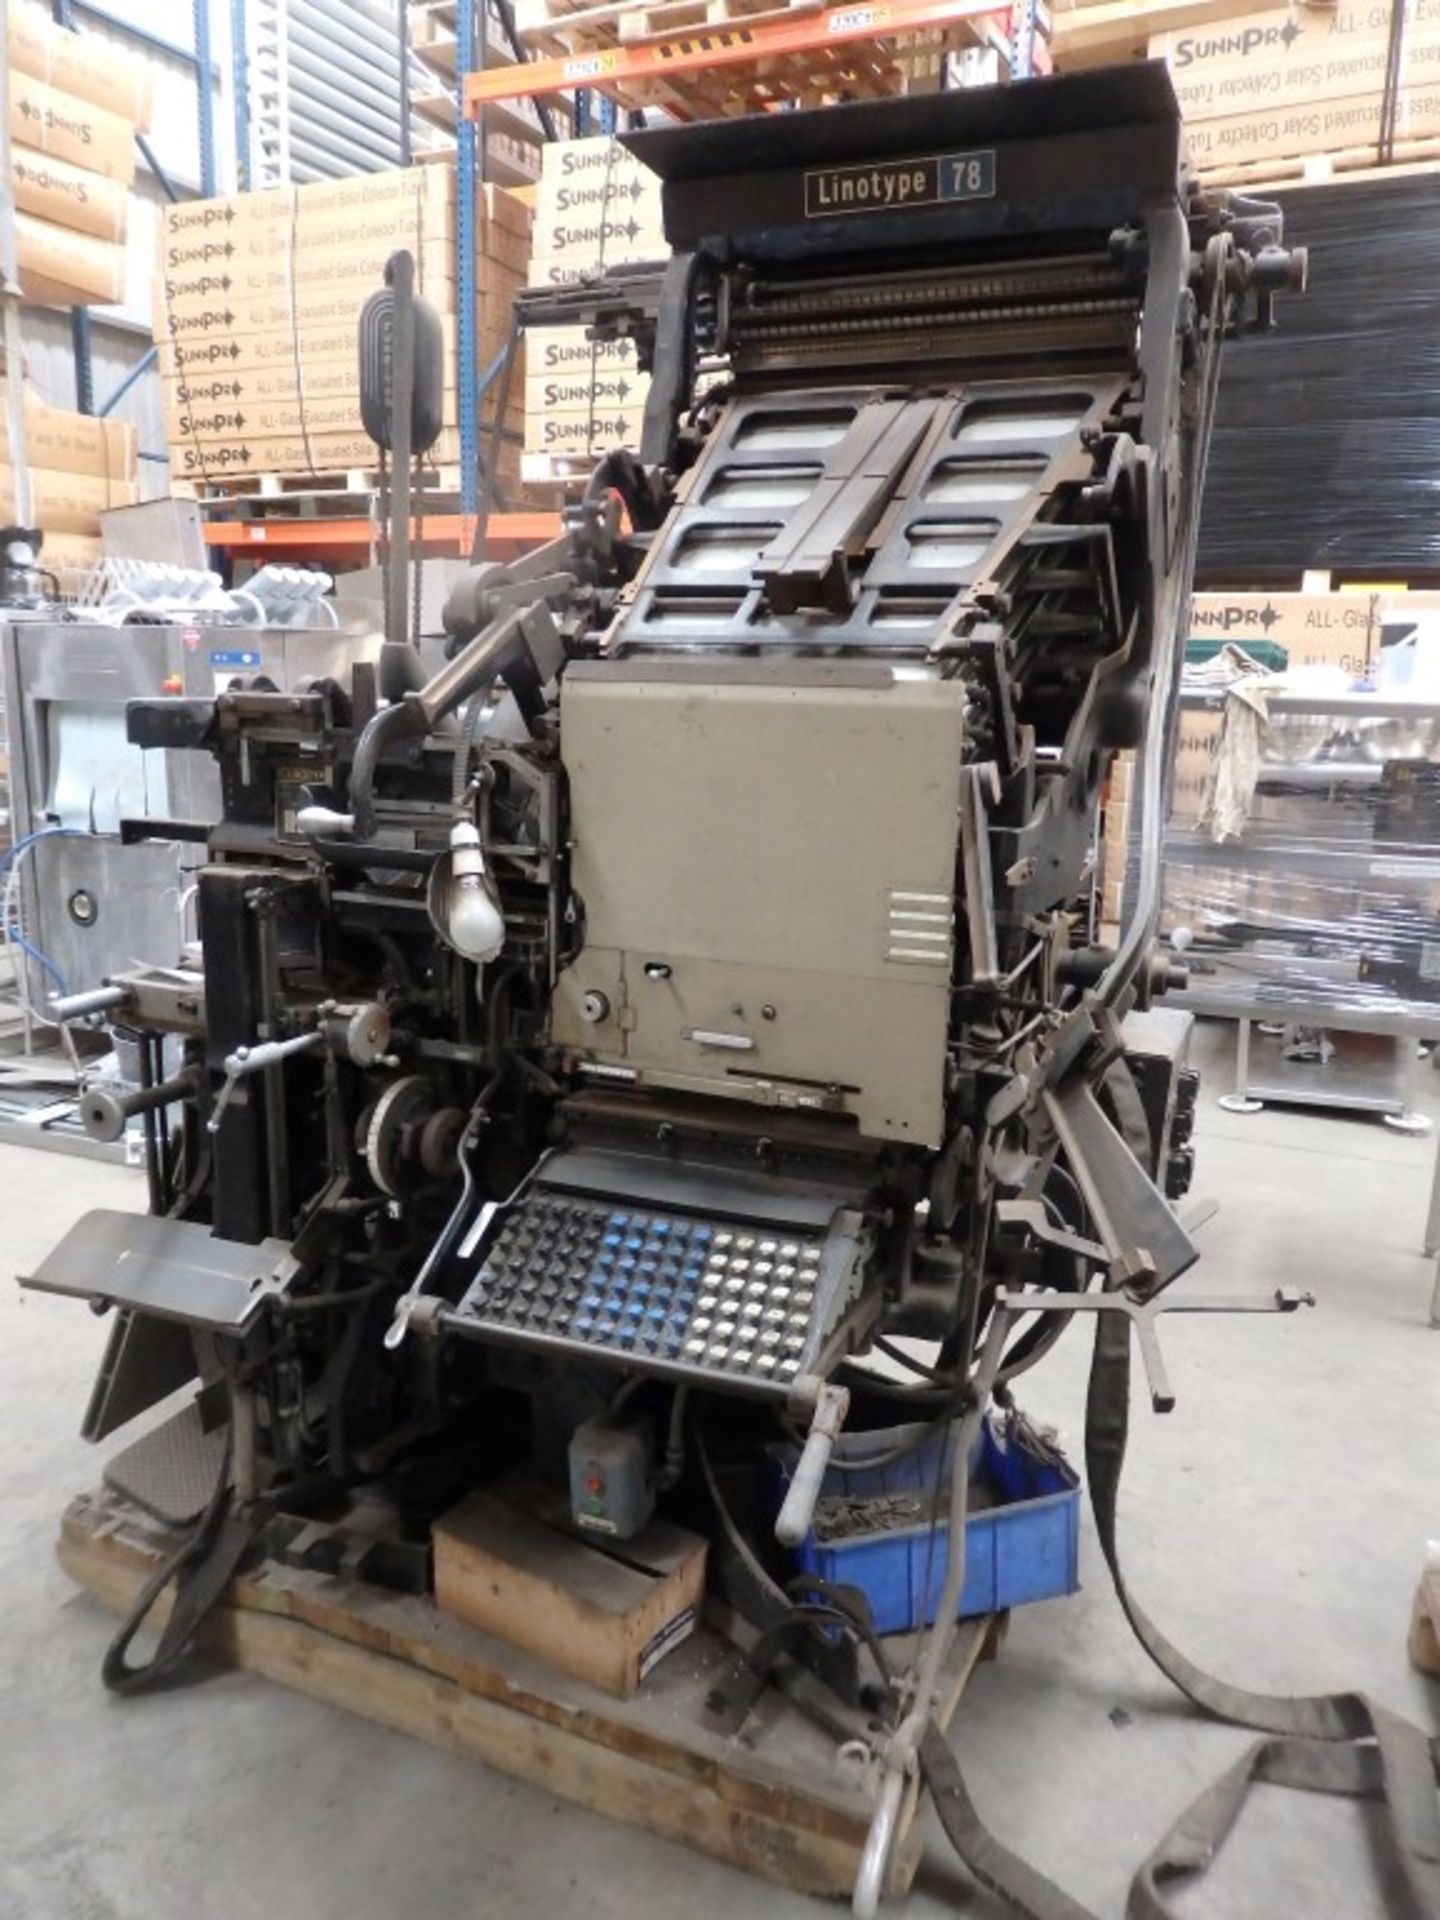 1 x Original Linotype Model 78 Printing Press - Untested In Good Aesthetic Condition - Fantastic